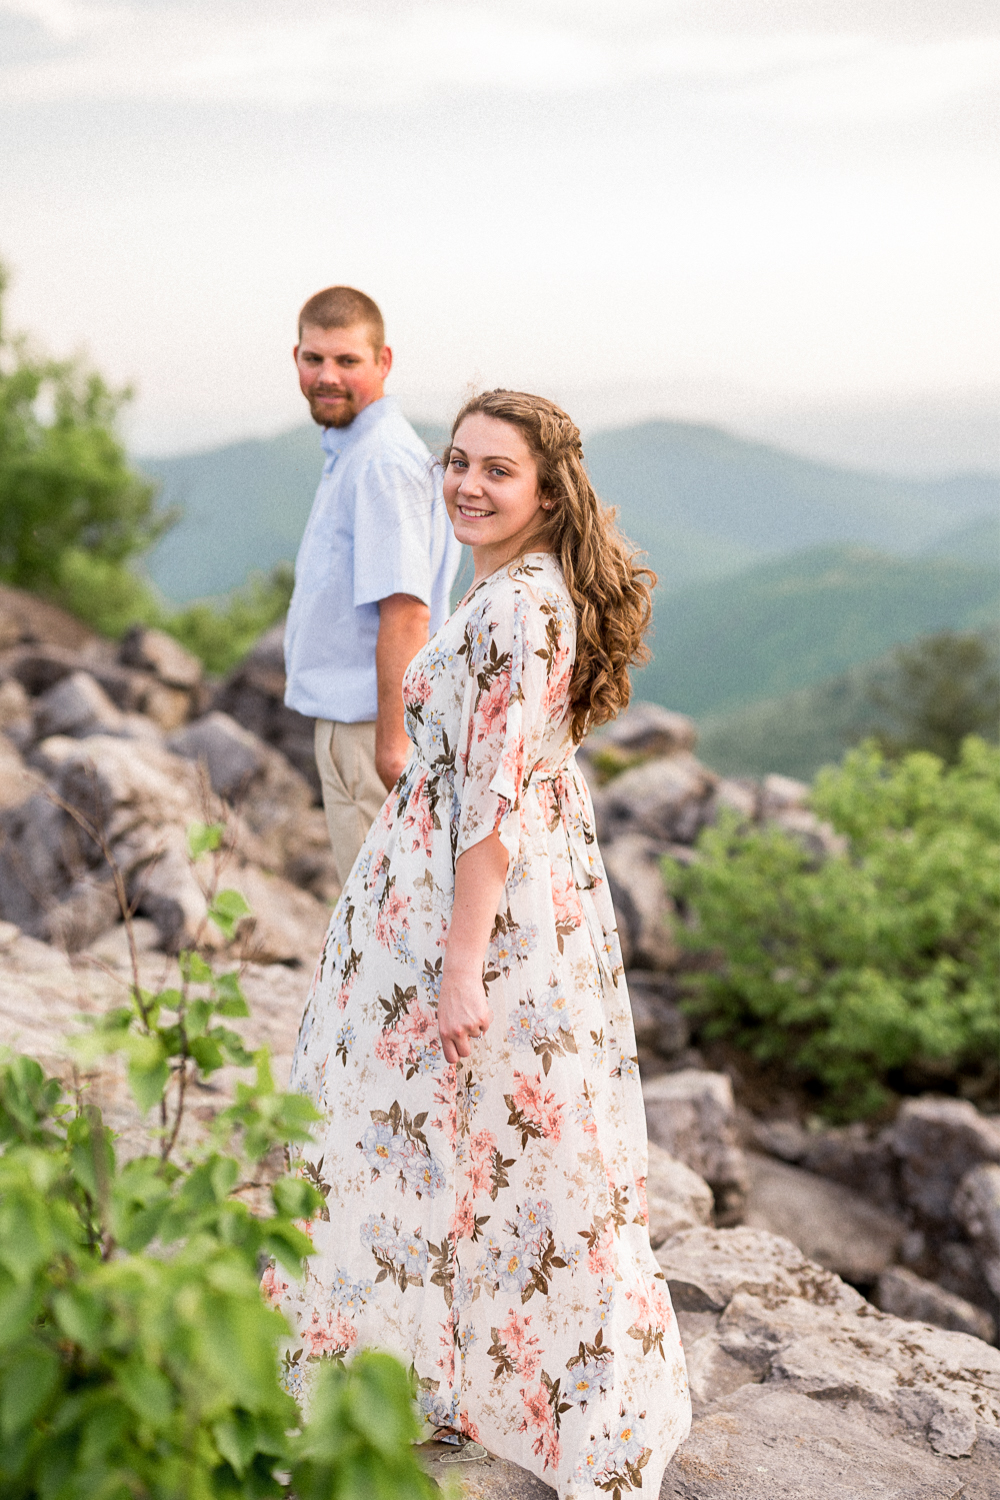 Windy Spring Engagement Session in Shenandoah National Park - Hunter and Sarah Photography